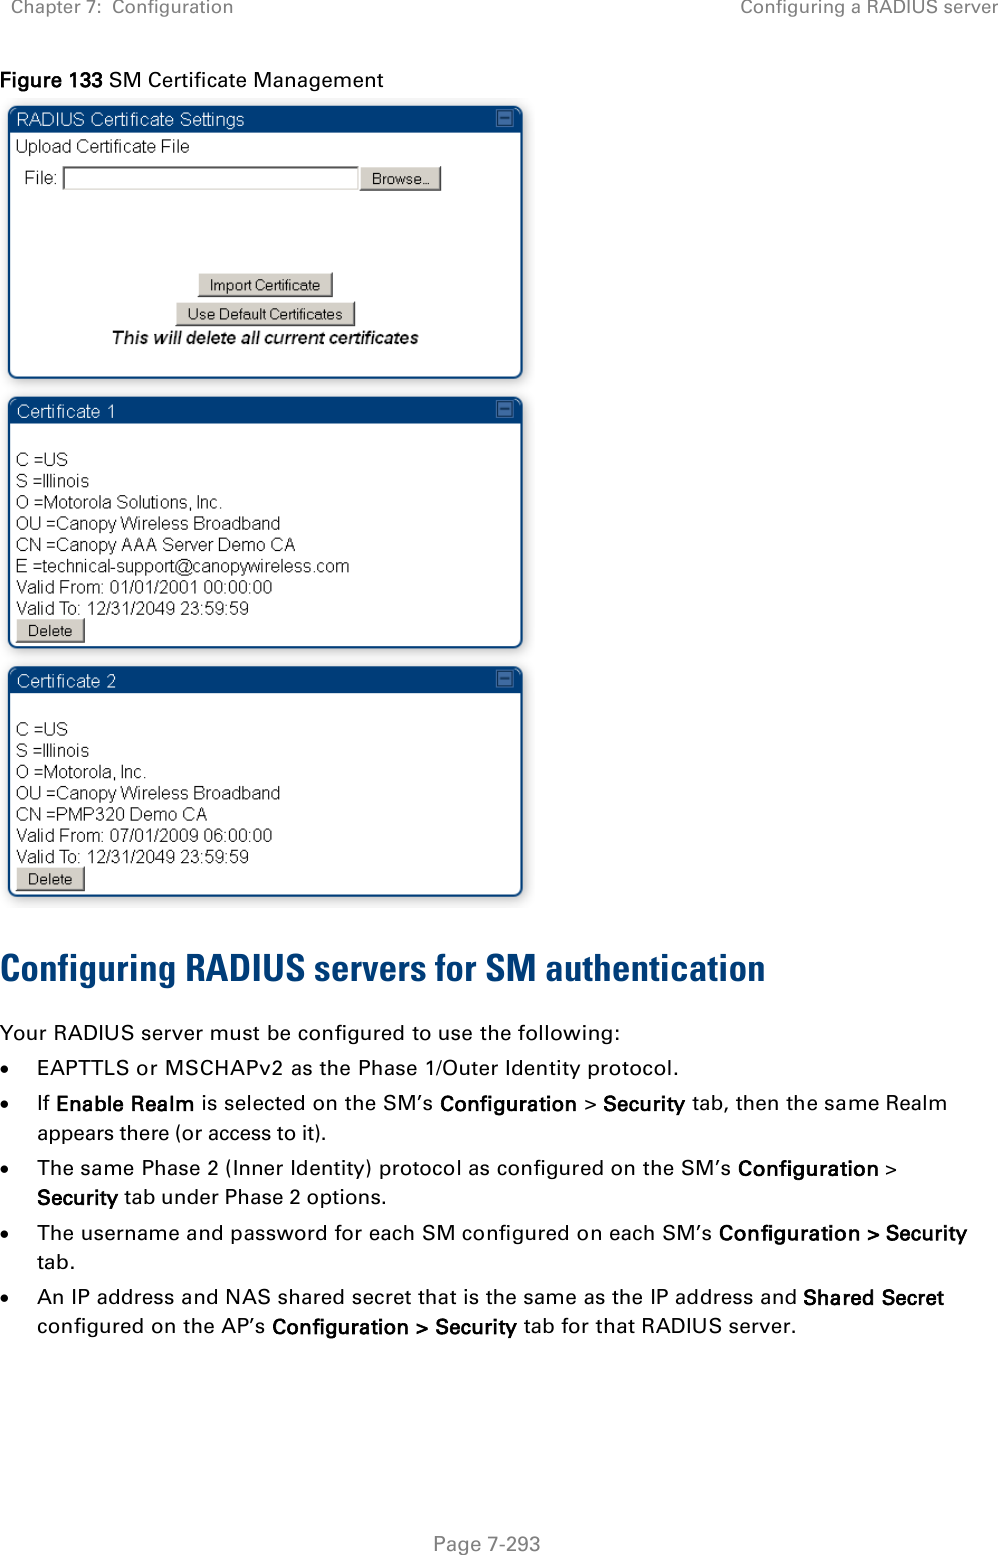 Chapter 7:  Configuration Configuring a RADIUS server   Page 7-293 Figure 133 SM Certificate Management  Configuring RADIUS servers for SM authentication Your RADIUS server must be configured to use the following:  EAPTTLS or MSCHAPv2 as the Phase 1/Outer Identity protocol.  If Enable Realm is selected on the SM’s Configuration &gt; Security tab, then the same Realm appears there (or access to it).  The same Phase 2 (Inner Identity) protocol as configured on the SM’s Configuration &gt; Security tab under Phase 2 options.  The username and password for each SM configured on each SM’s Configuration &gt; Security tab.  An IP address and NAS shared secret that is the same as the IP address and Shared Secret configured on the AP’s Configuration &gt; Security tab for that RADIUS server. 